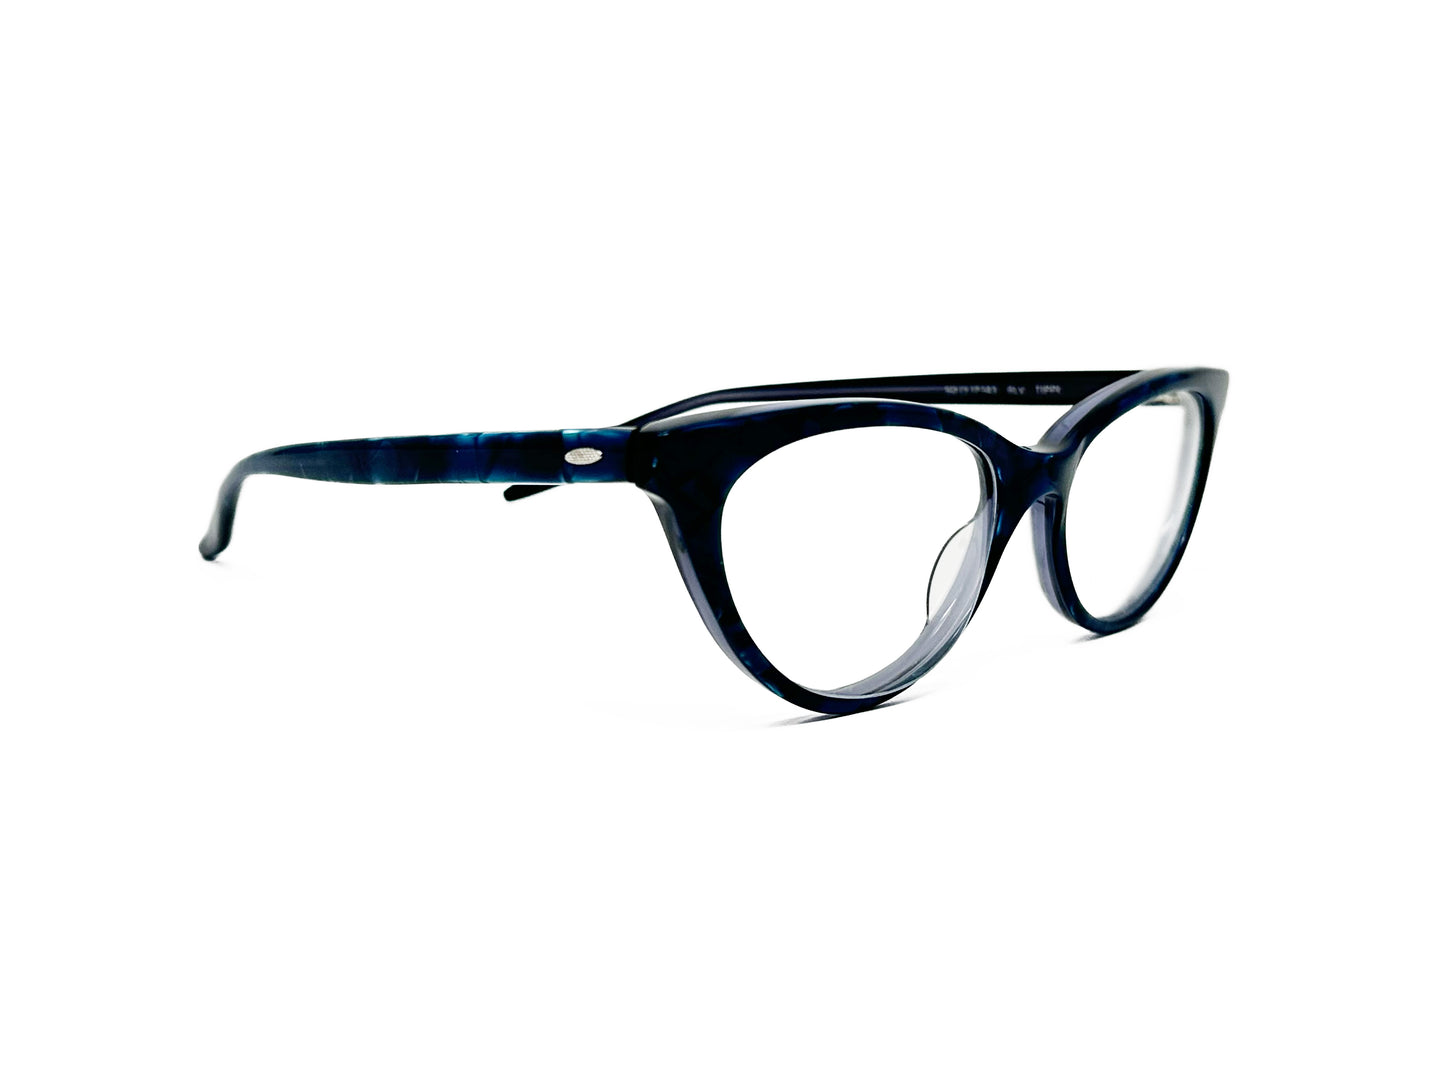 Barton Perreira rounded cat-eye optical frame. Model: Tippi. Color: BLV - Black with blue marbling on temples. Side view.